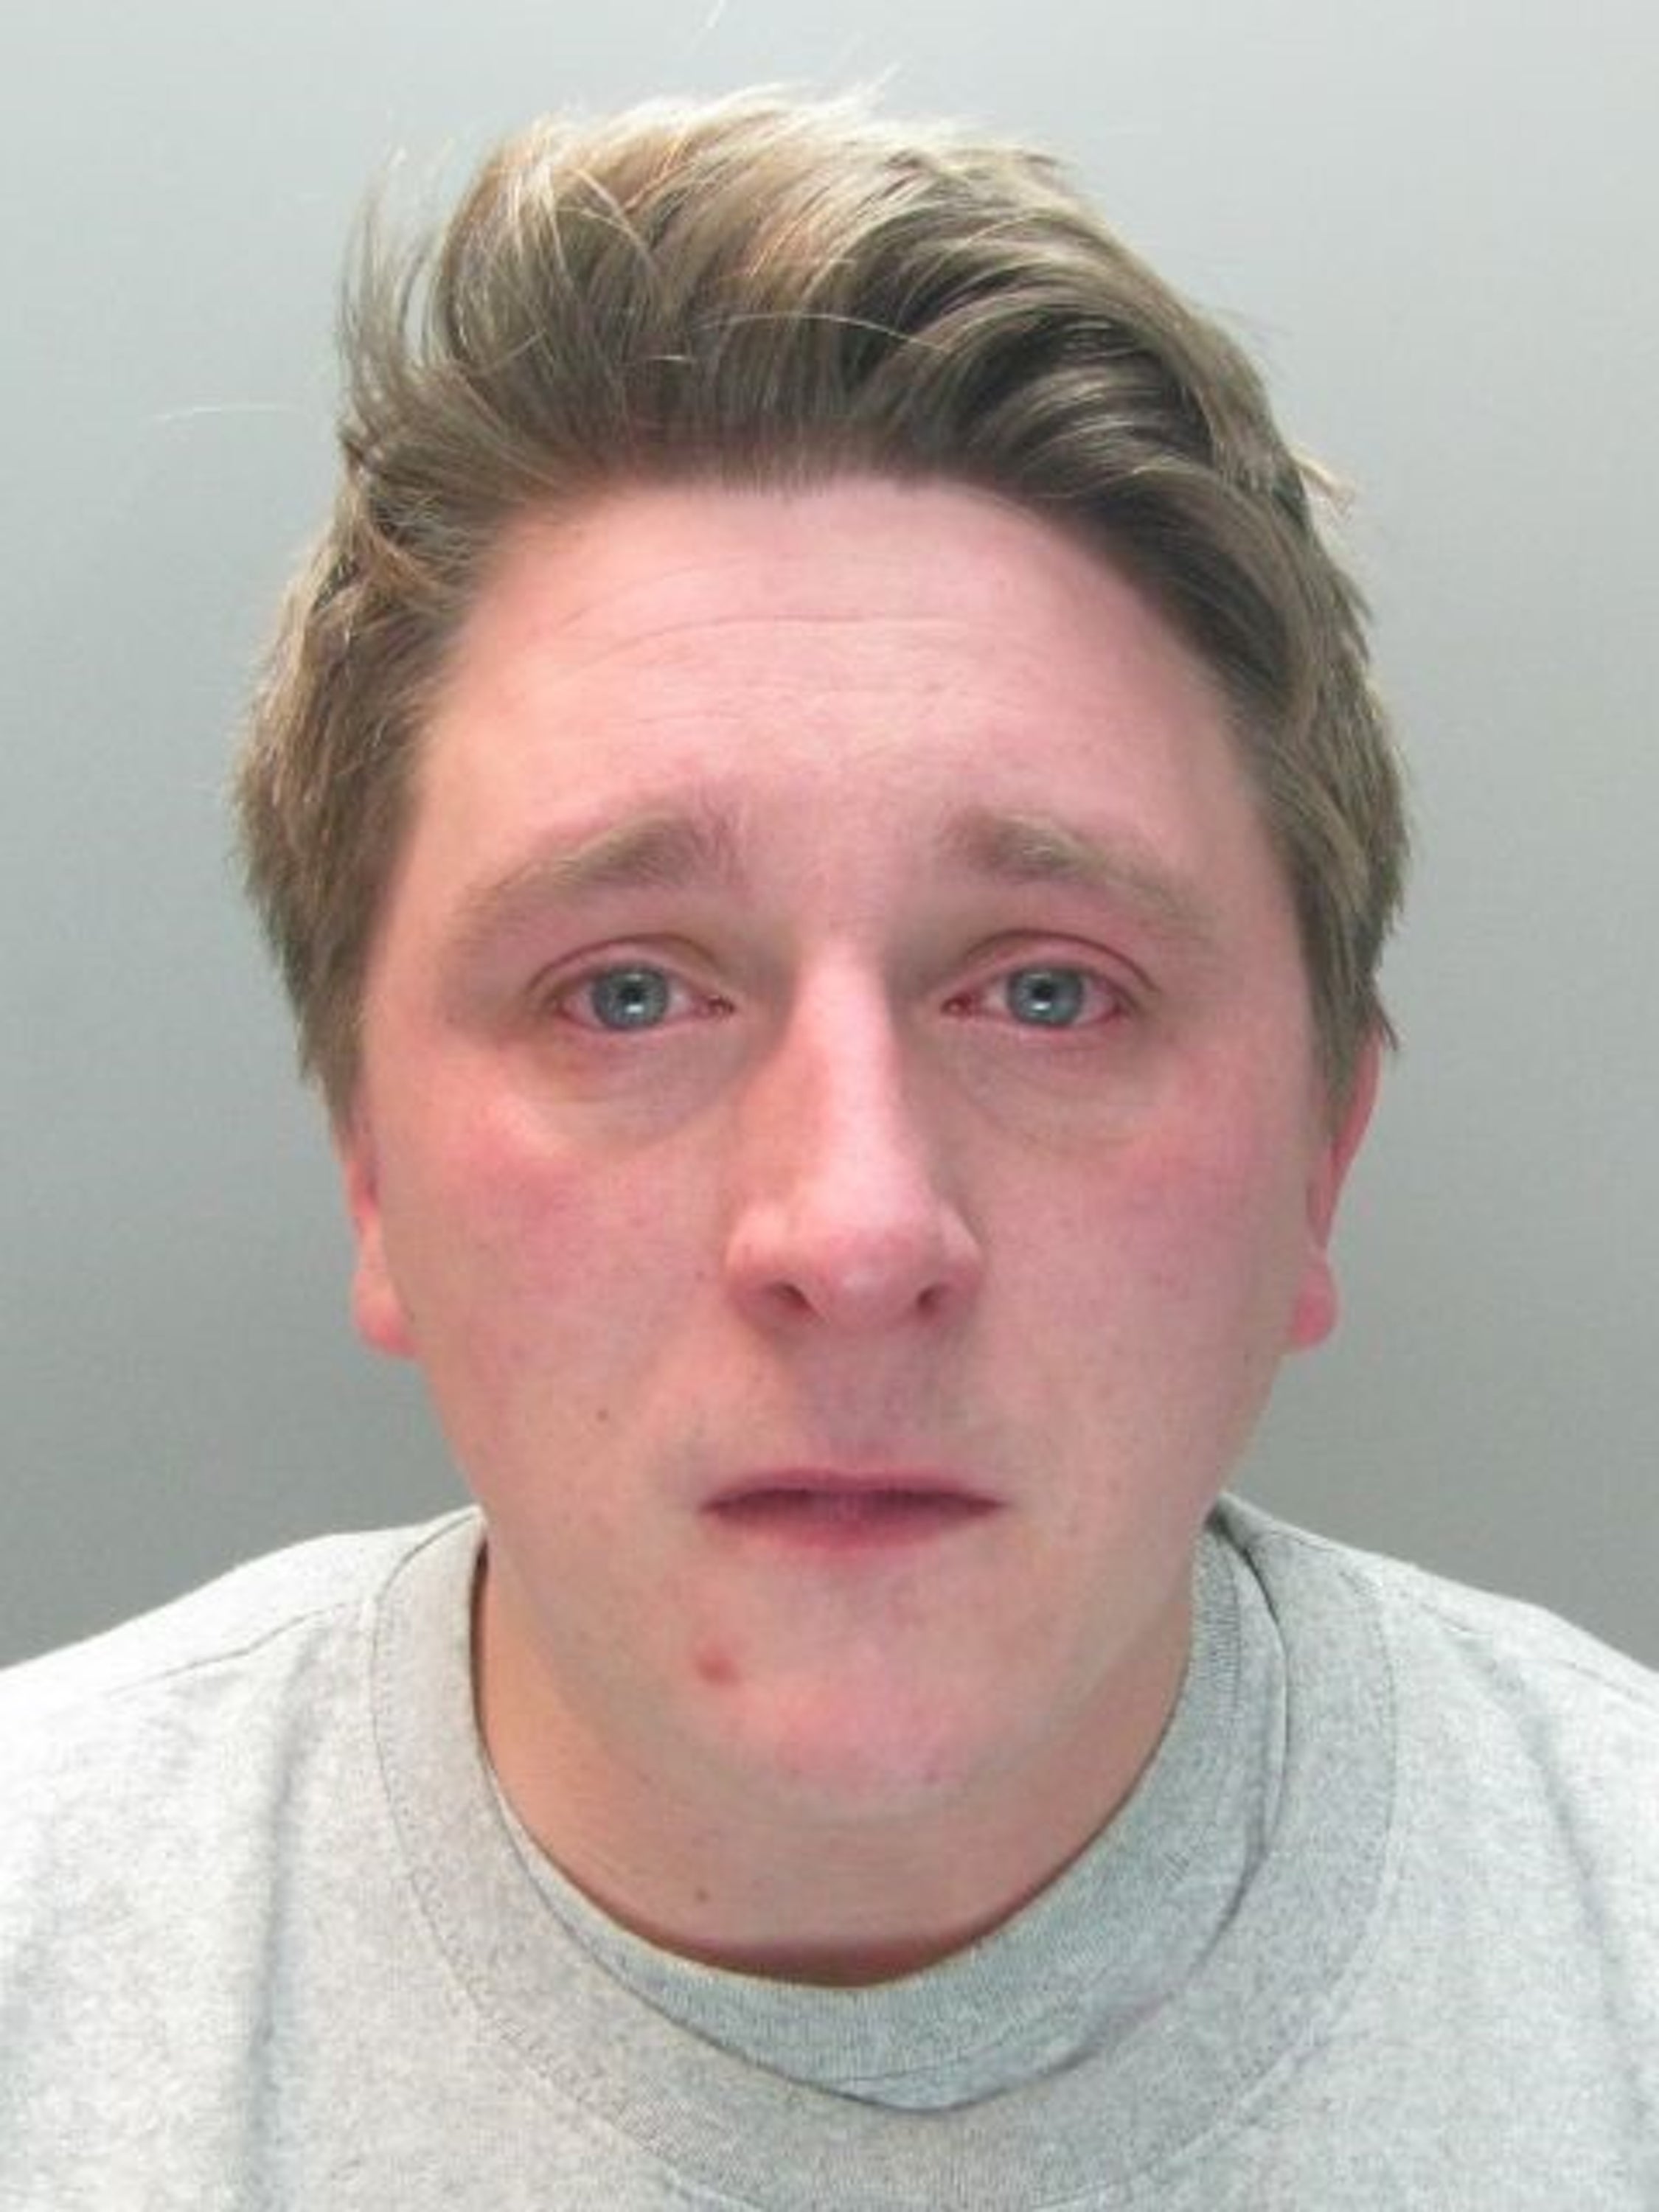 Sam Pybus, who was jailed after he admitted to the manslaughter of Sophie Moss, who he choked during consensual sex at her home in Darlington (Durham Police/PA)